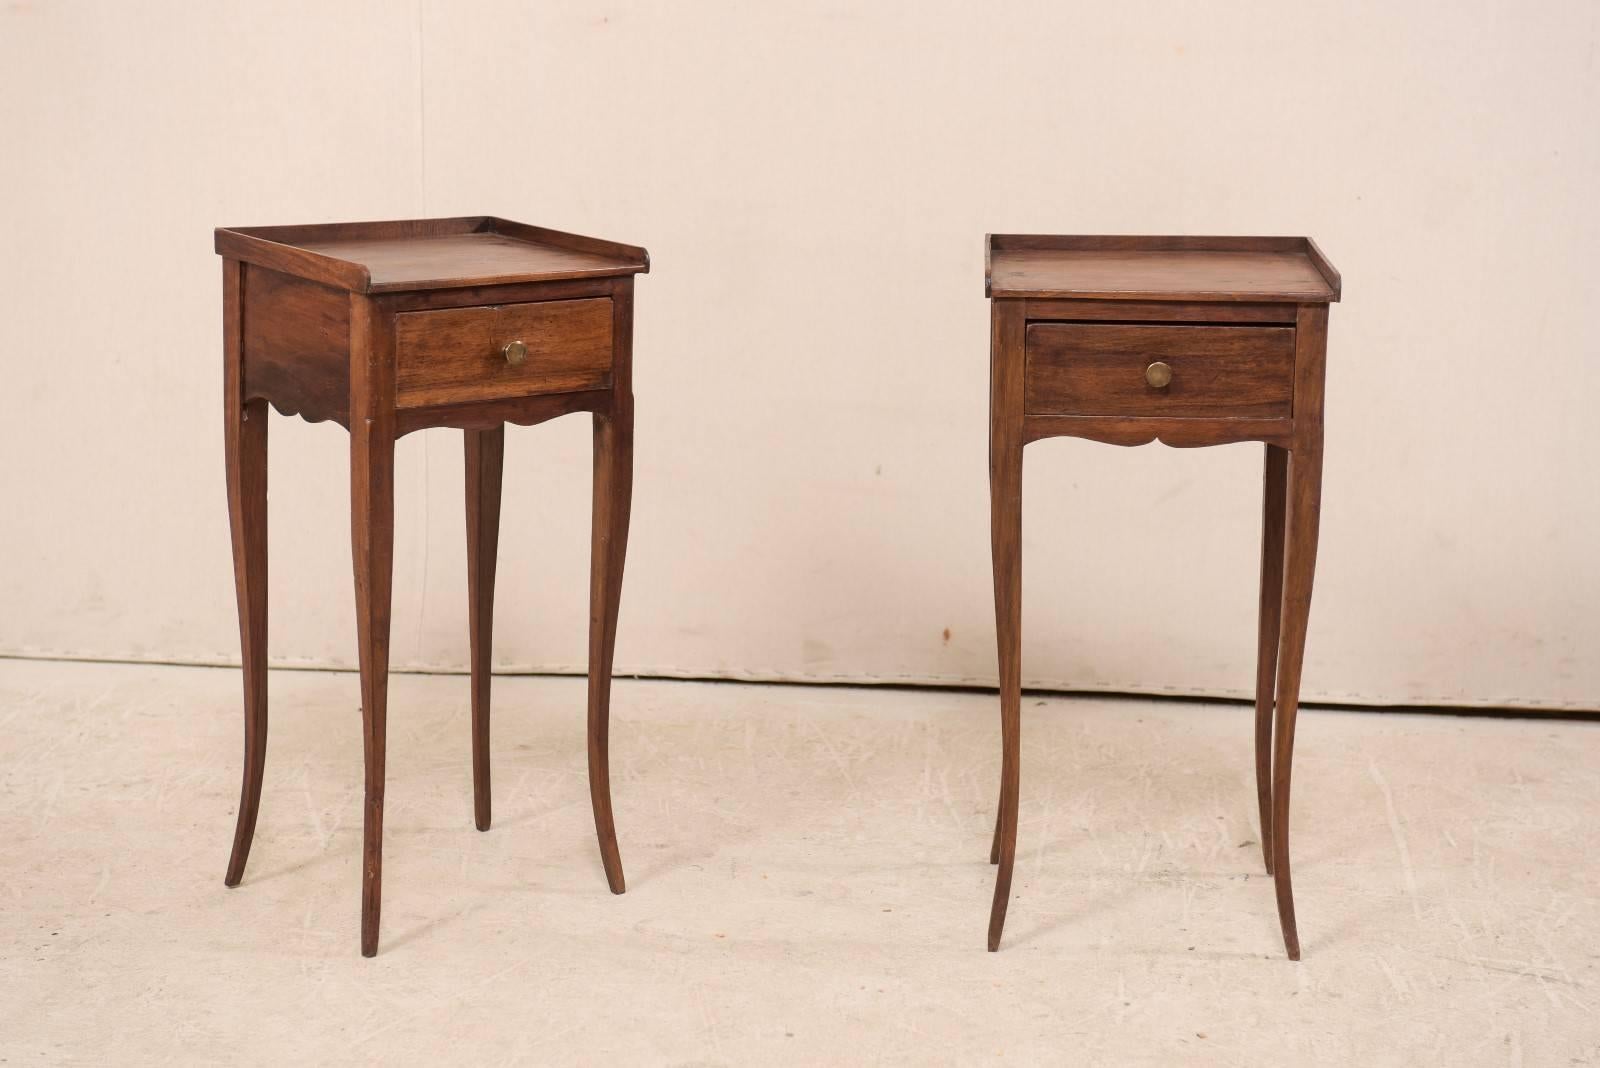 A pair of petite French side tables mid-20th century. This pair of vintage French side tables each features a single drawer, accolade style wavy skirt, and graceful cabriole legs. The top is recessed with a railed edge about three sides (open to the